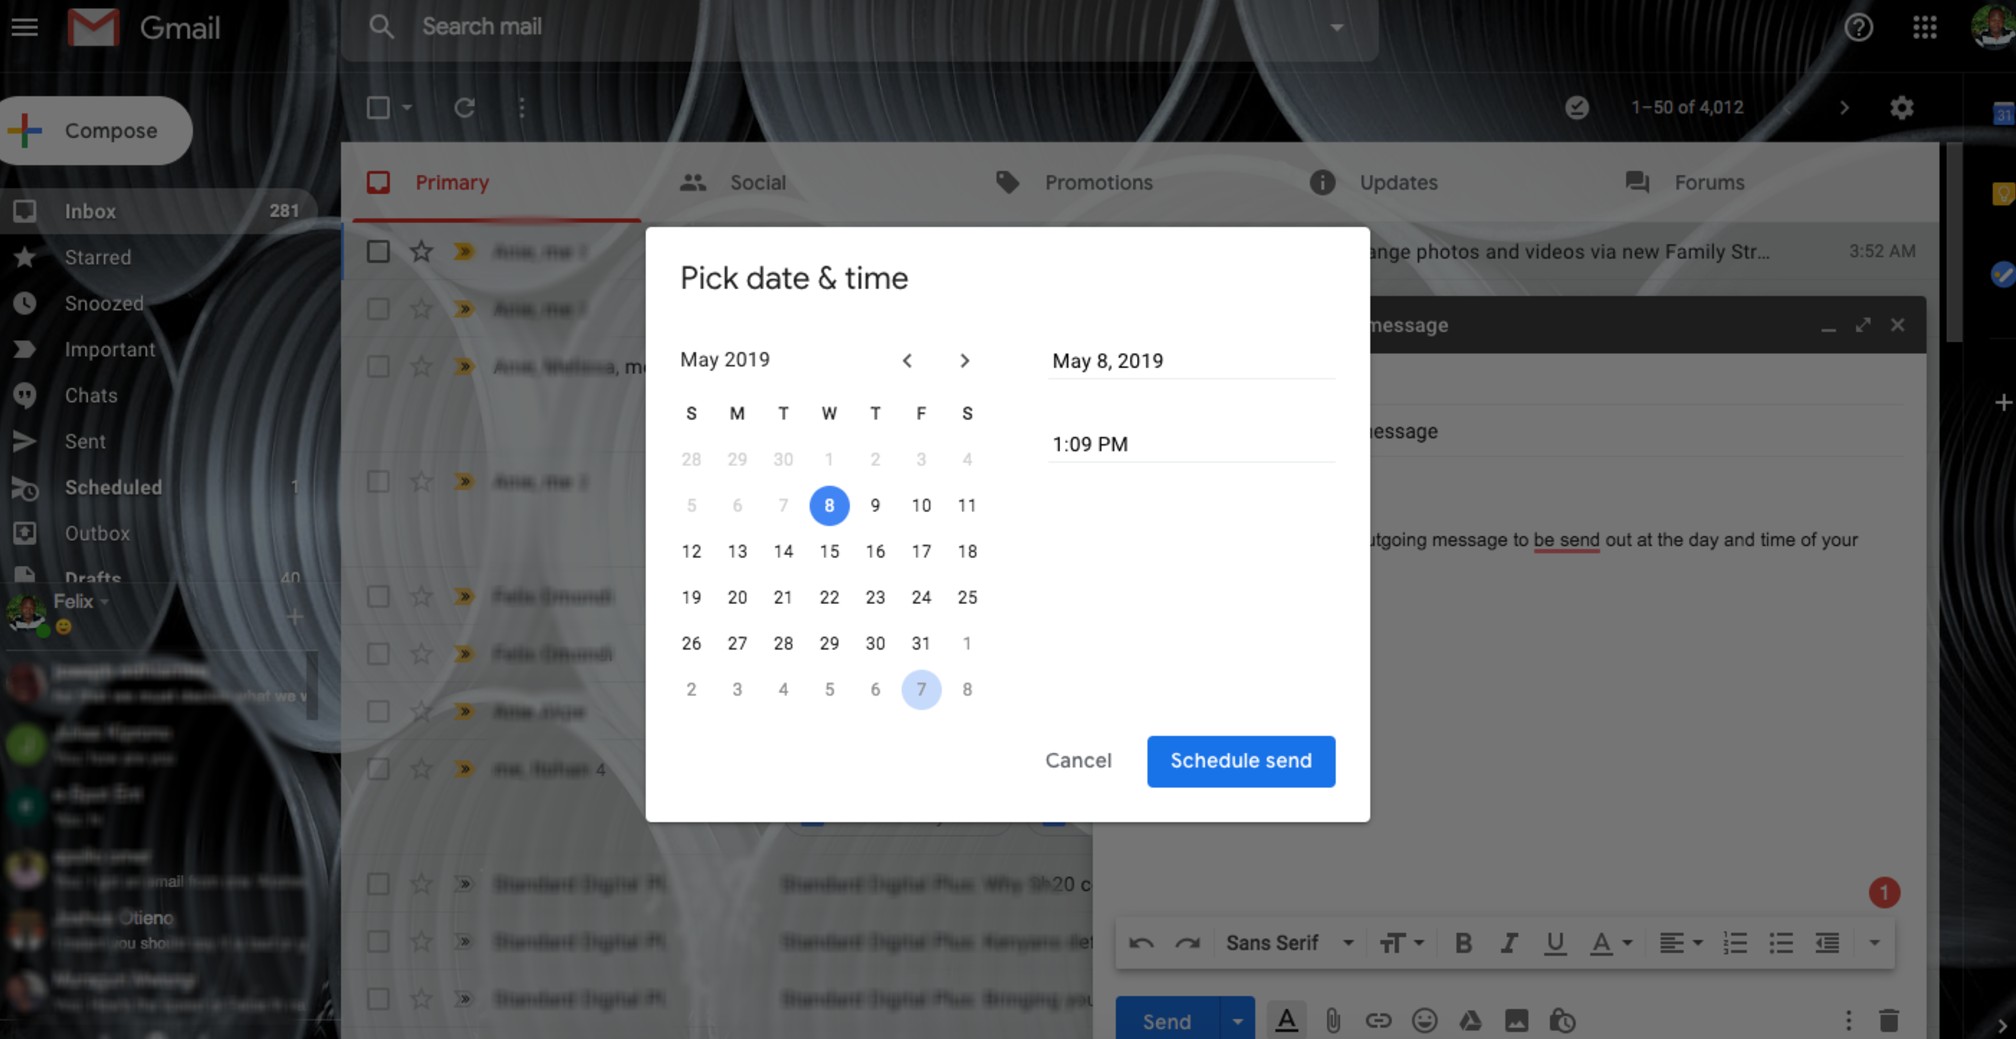 how to schedule sending email on gmail